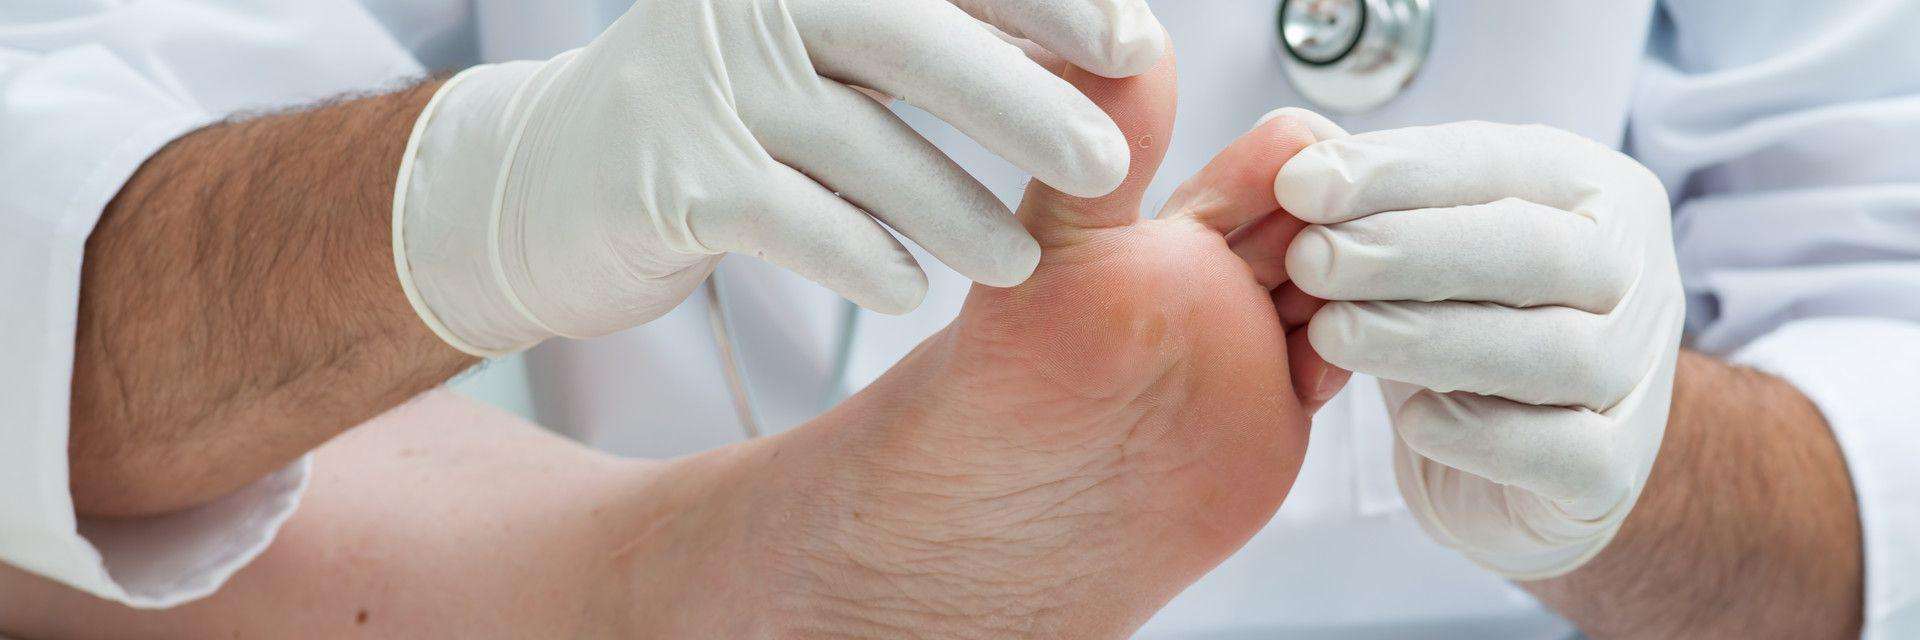 Rothman Orthopaedic Institute Provides The Best Toe Nail Fungus ...